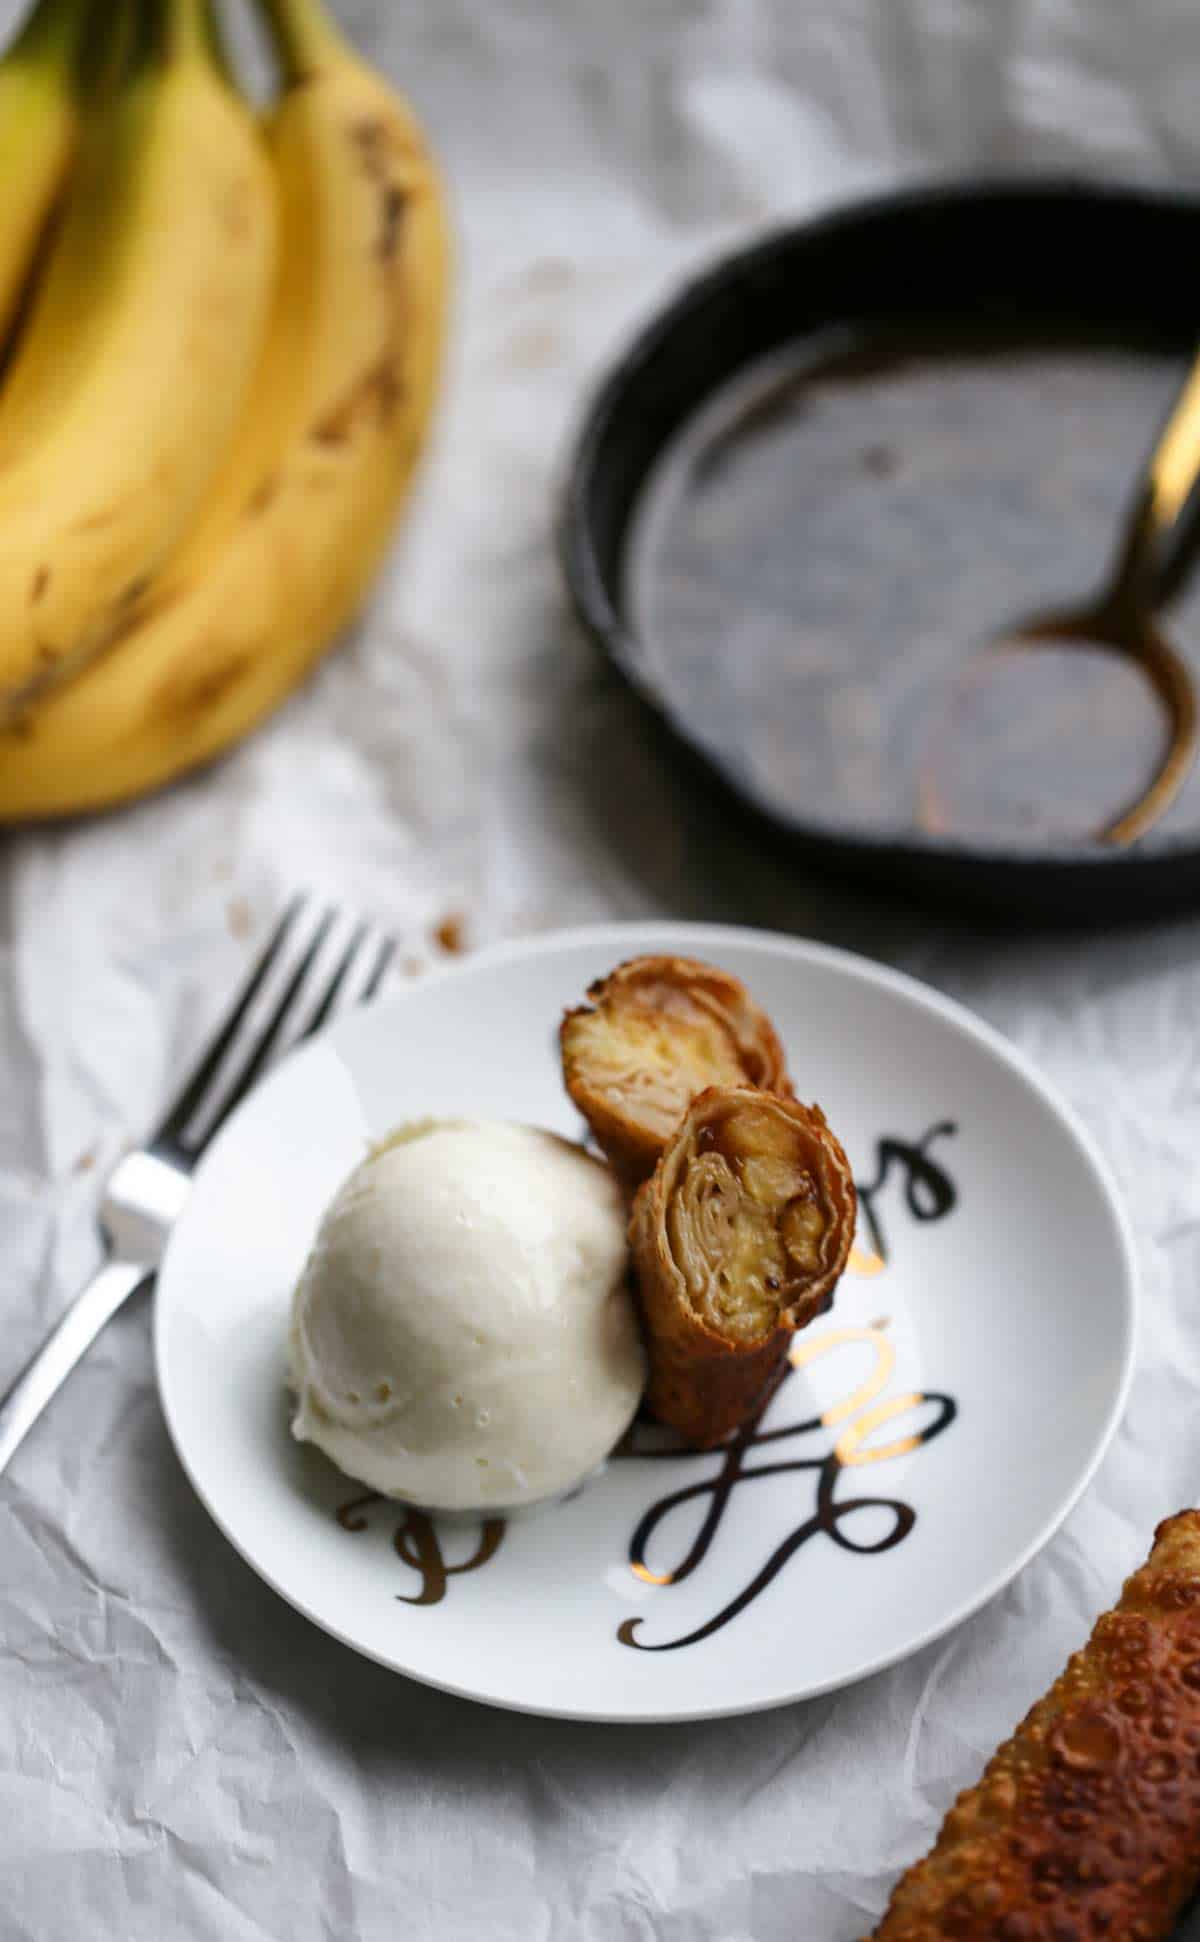 Banana spring rolls on a plate with ice cream and a skillet of warm caramel sauce in the background
